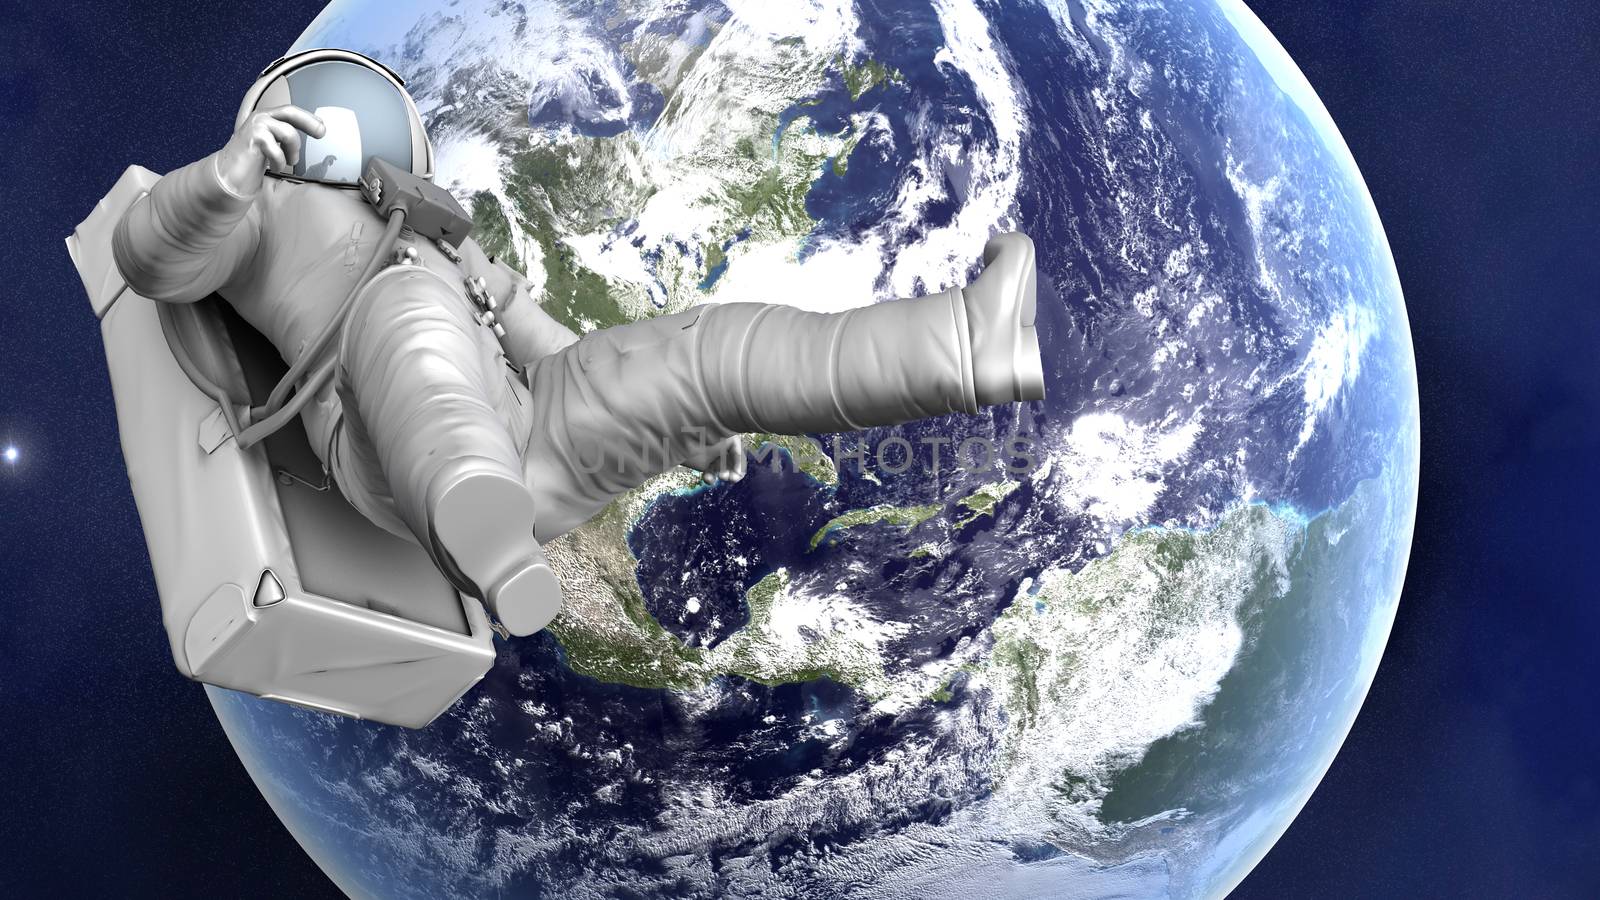 Astronaut floating over the Earth by Spectral